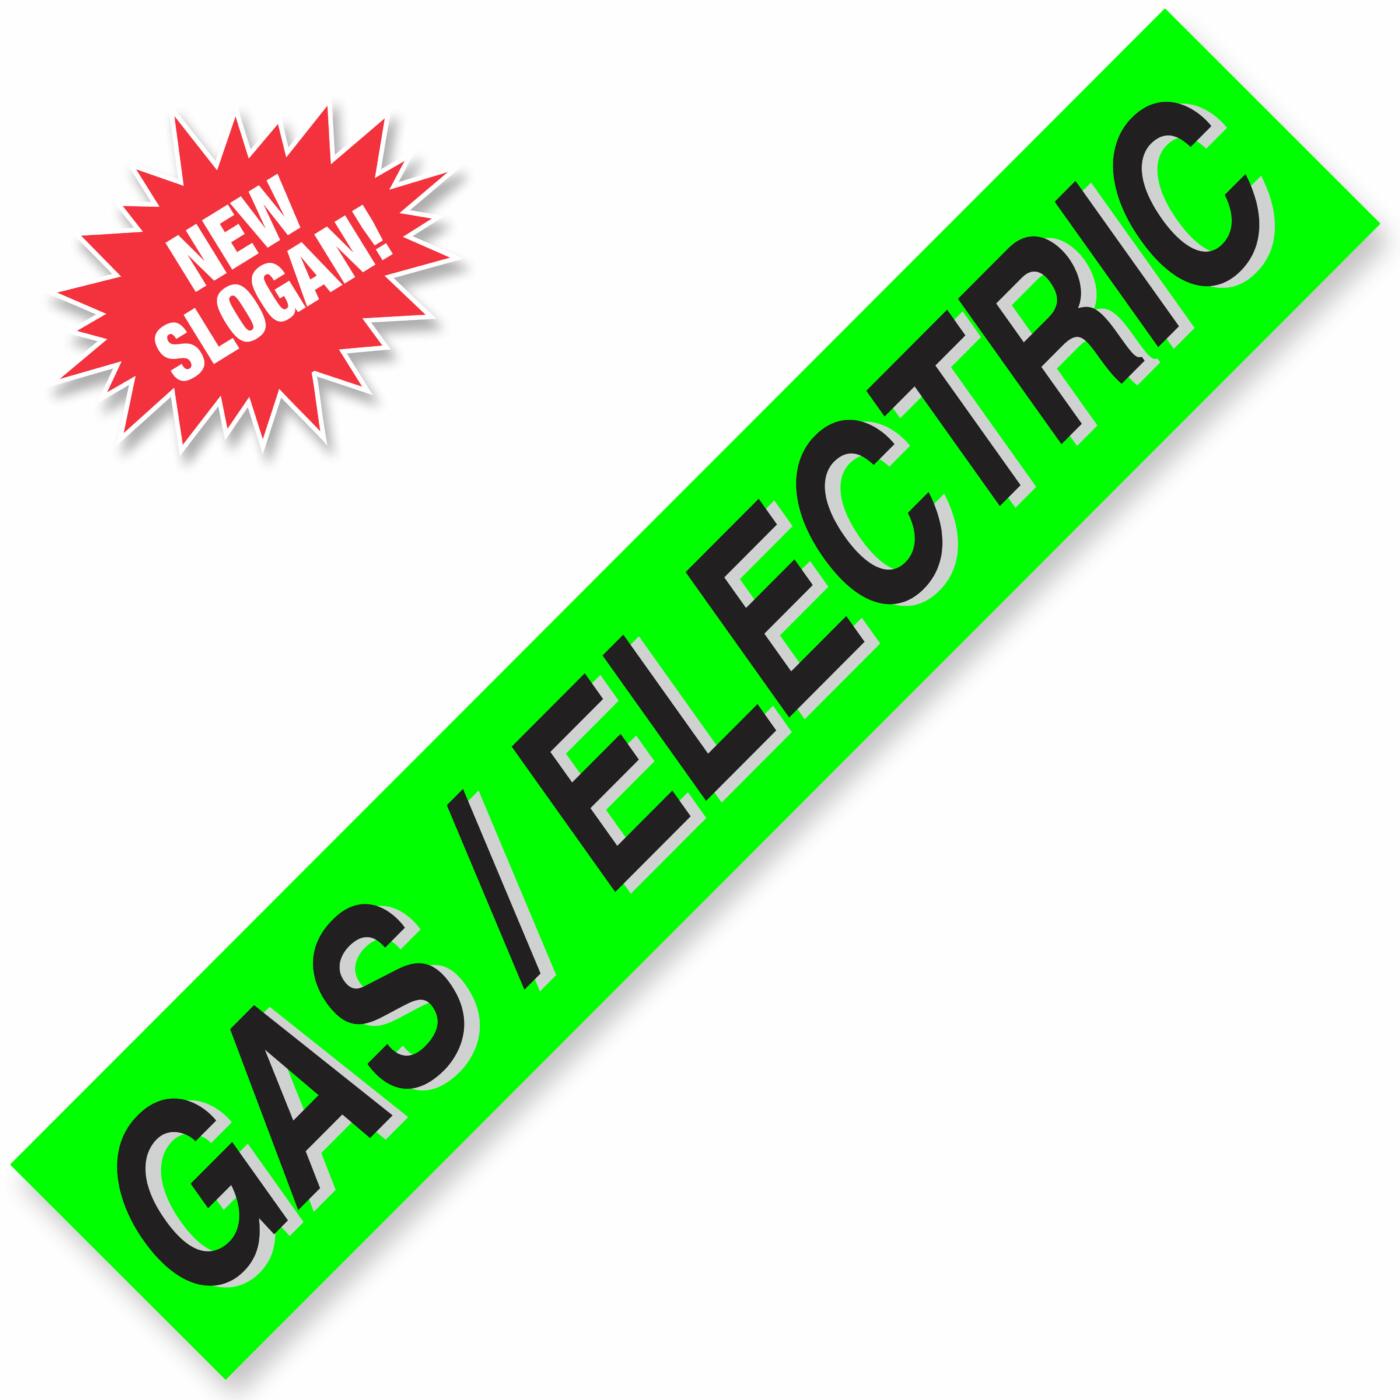 GAS/ELECTRIC Windshield Slogan Signs